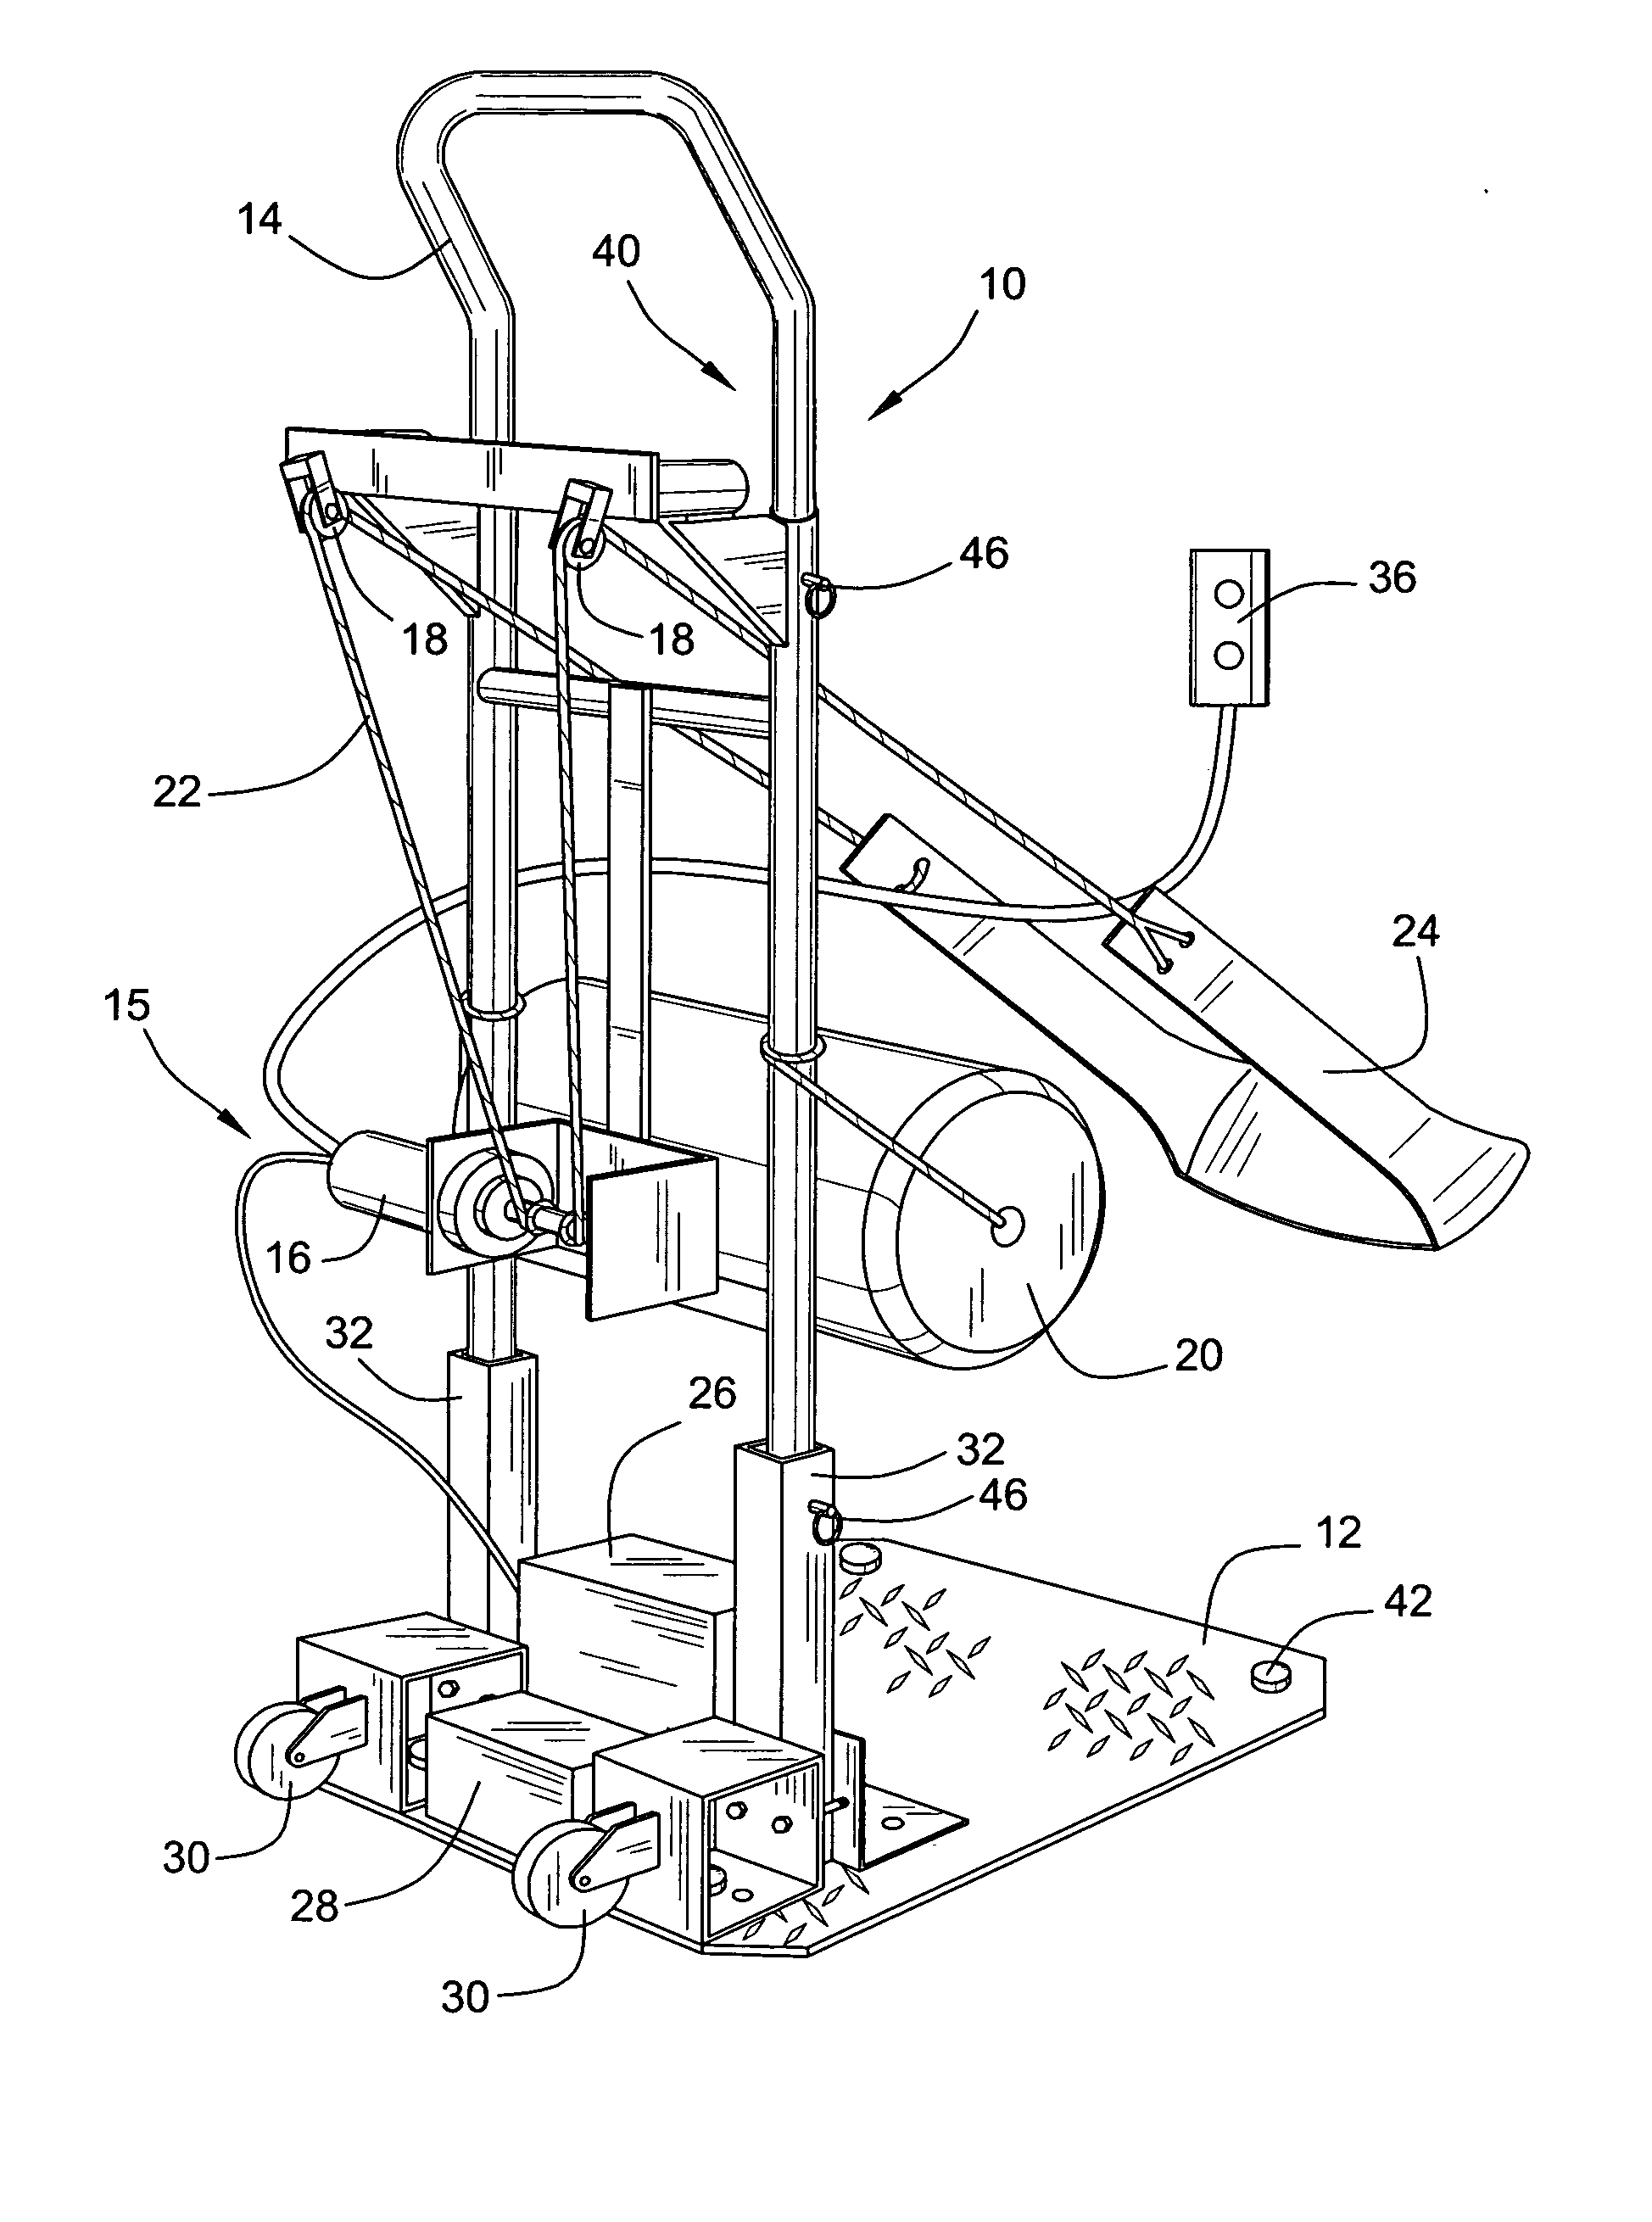 Standing frame with lift, support and transport of user